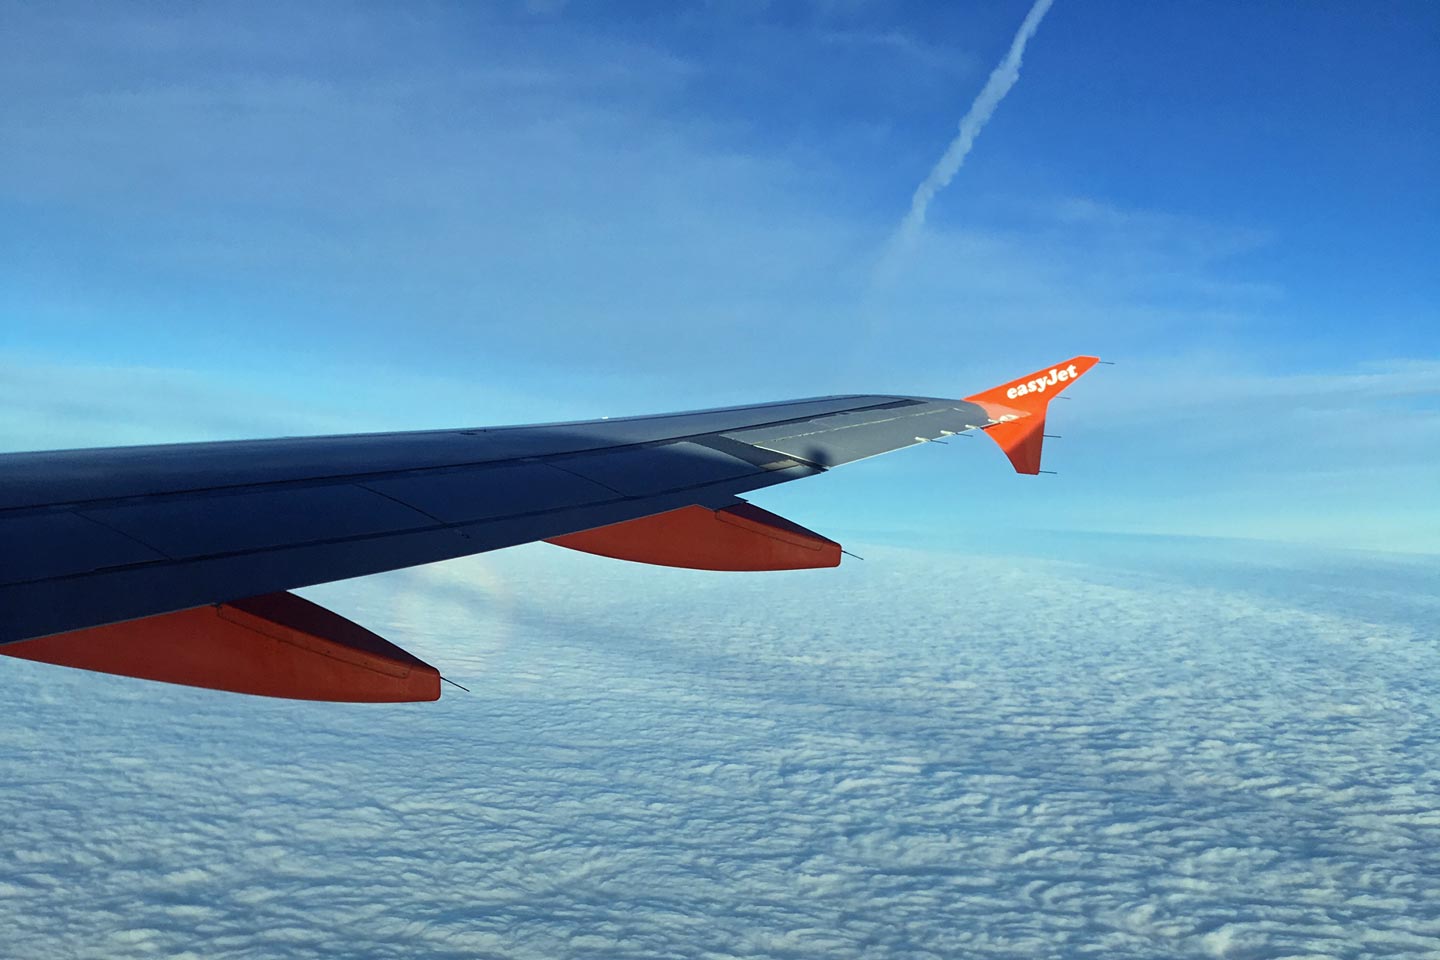 A Photo out of the plane, seing the wing, blue sky and clouds